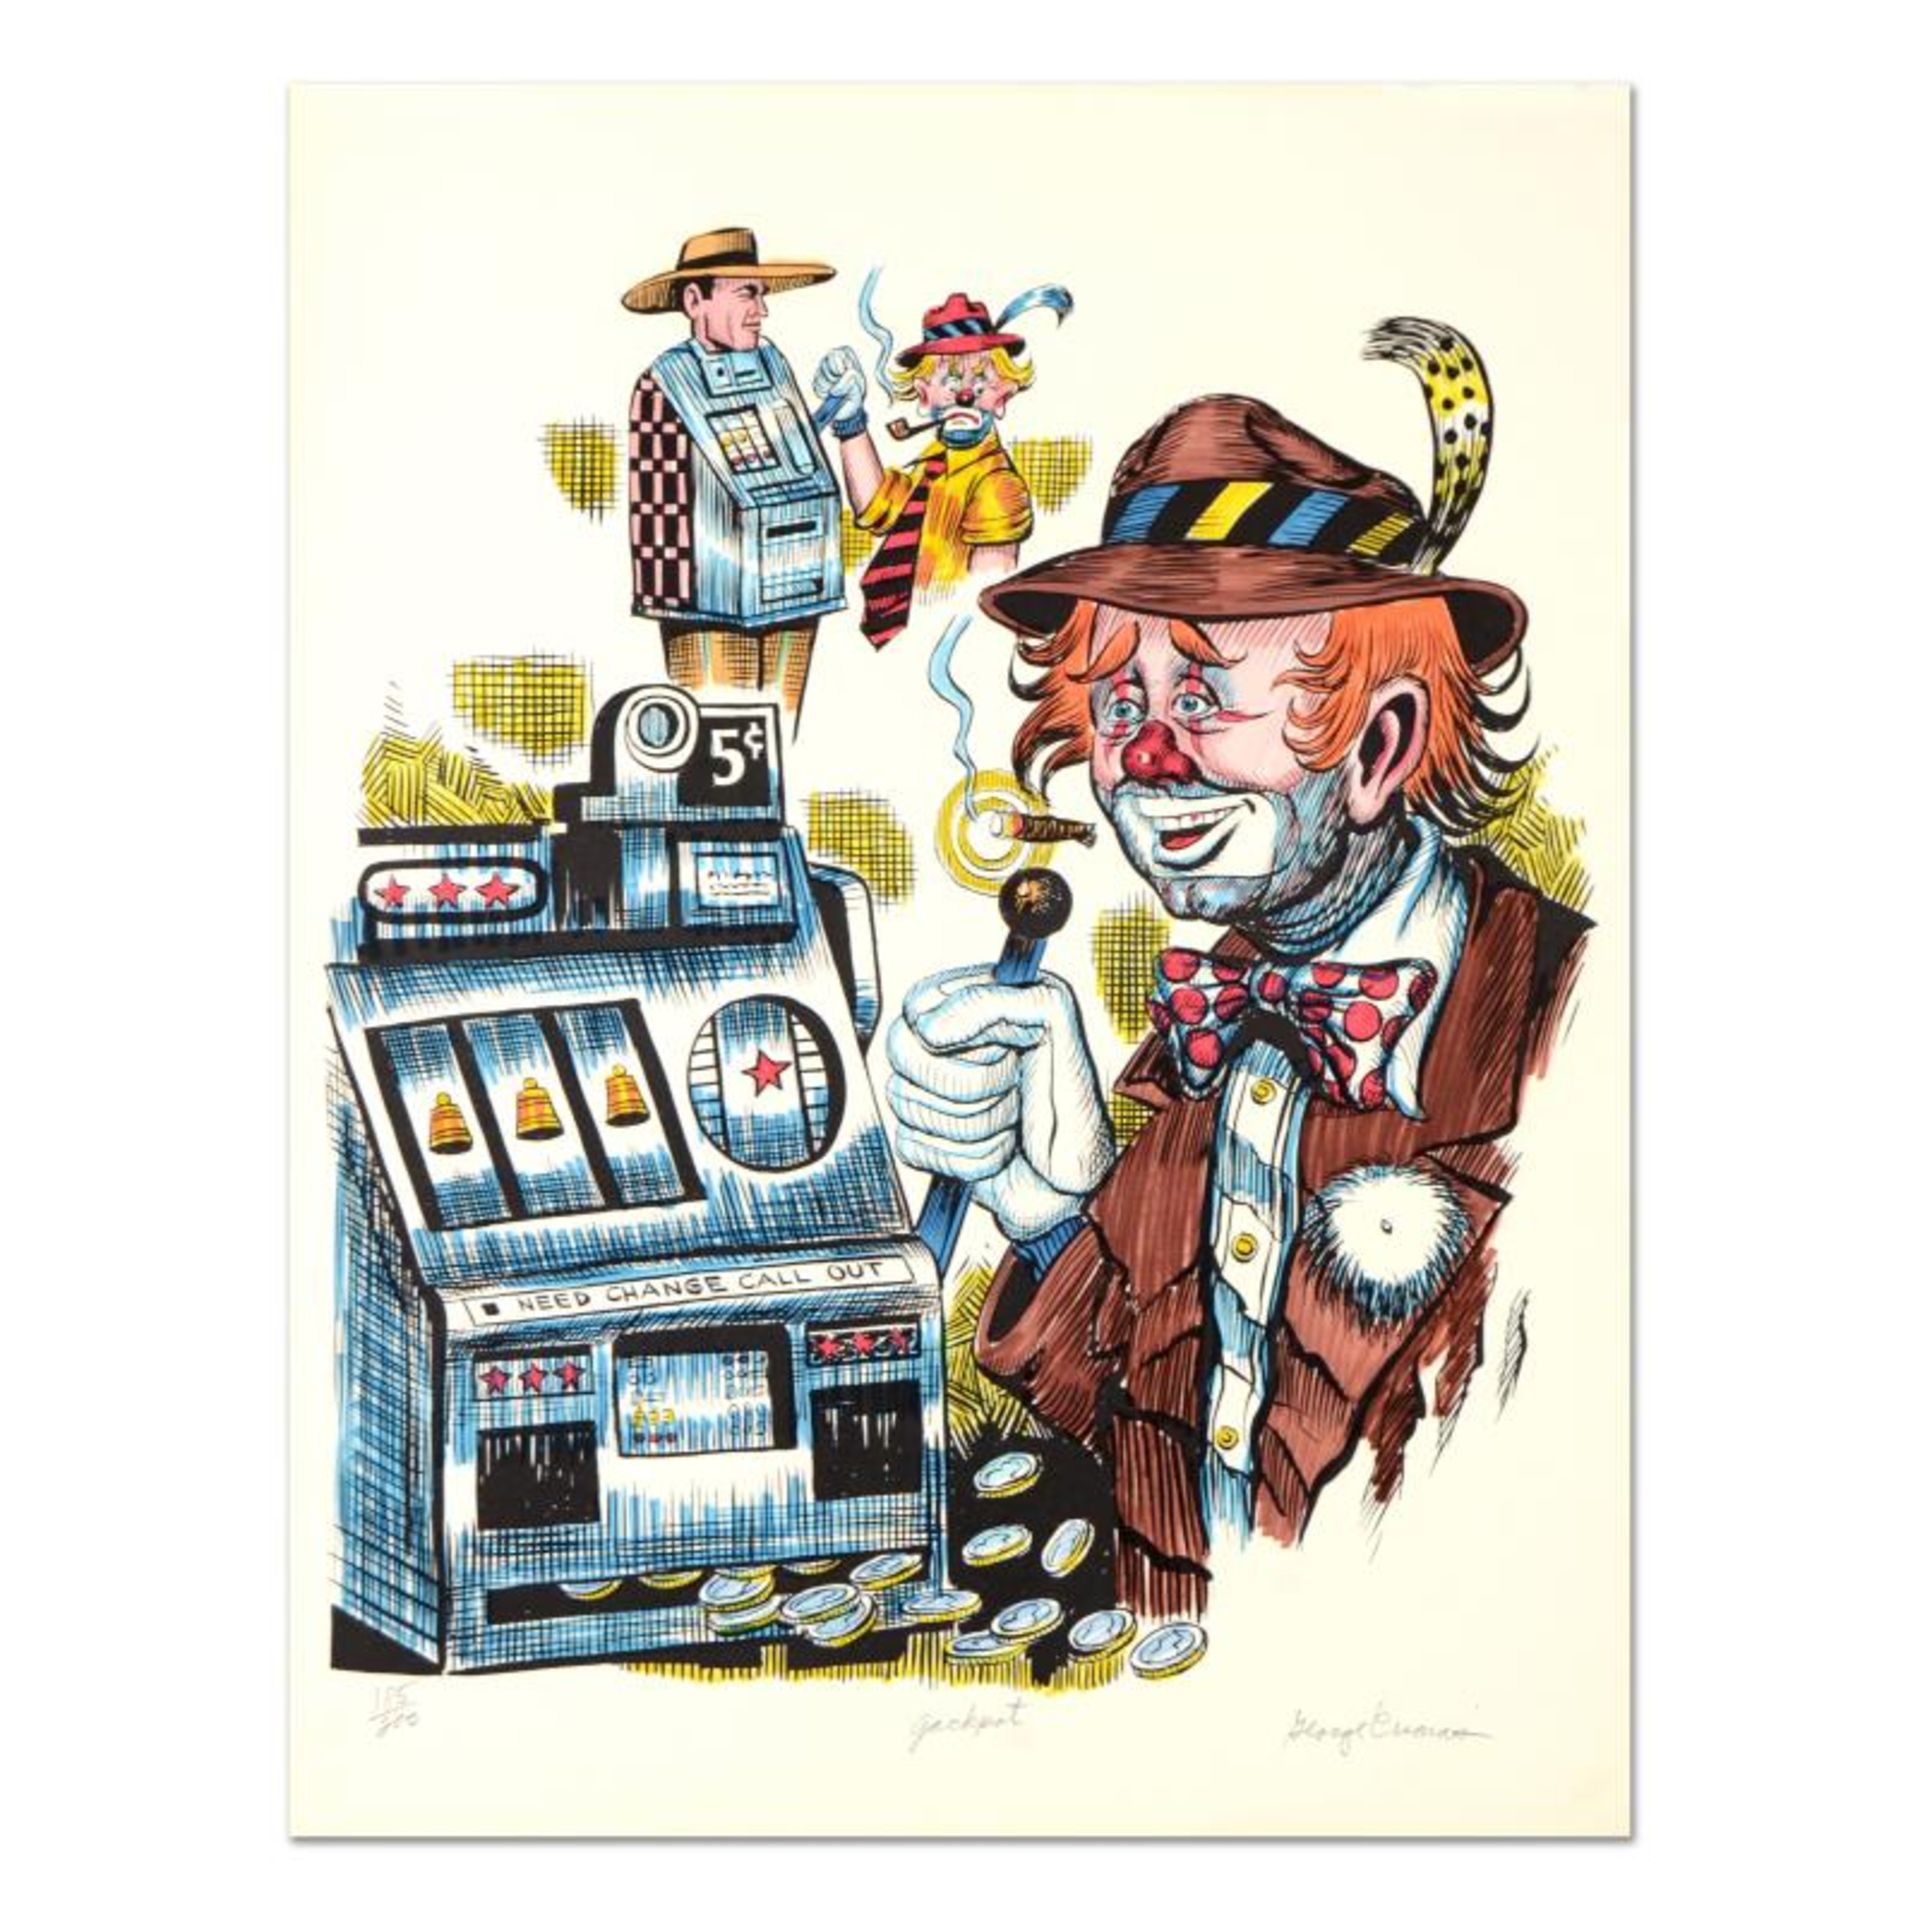 George Crionas (1925-2004), "Jackpot" Hand Embellished Limited Edition Lithograp